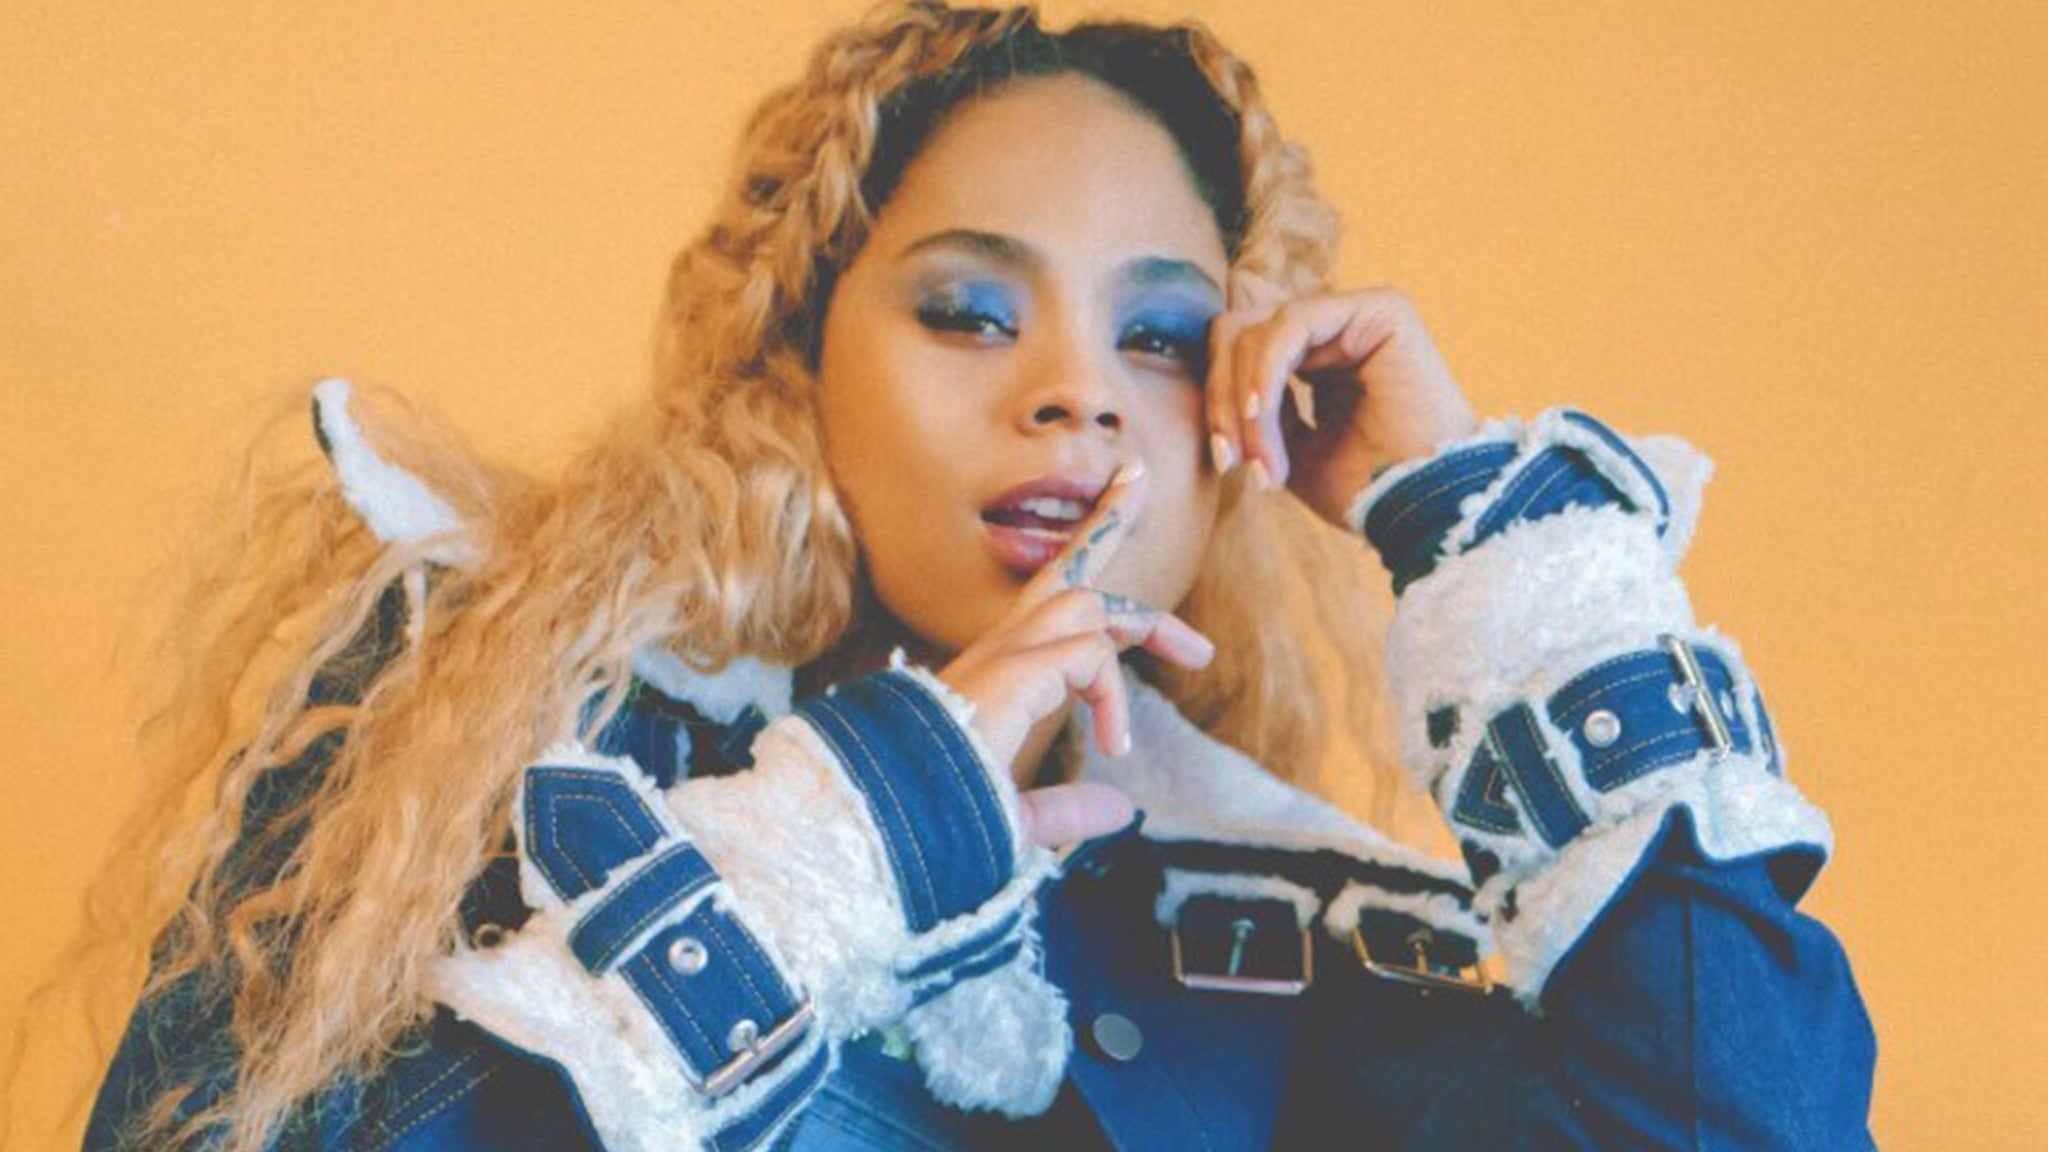 Tayla Parx in Houston promo photo for Live Nation presale offer code